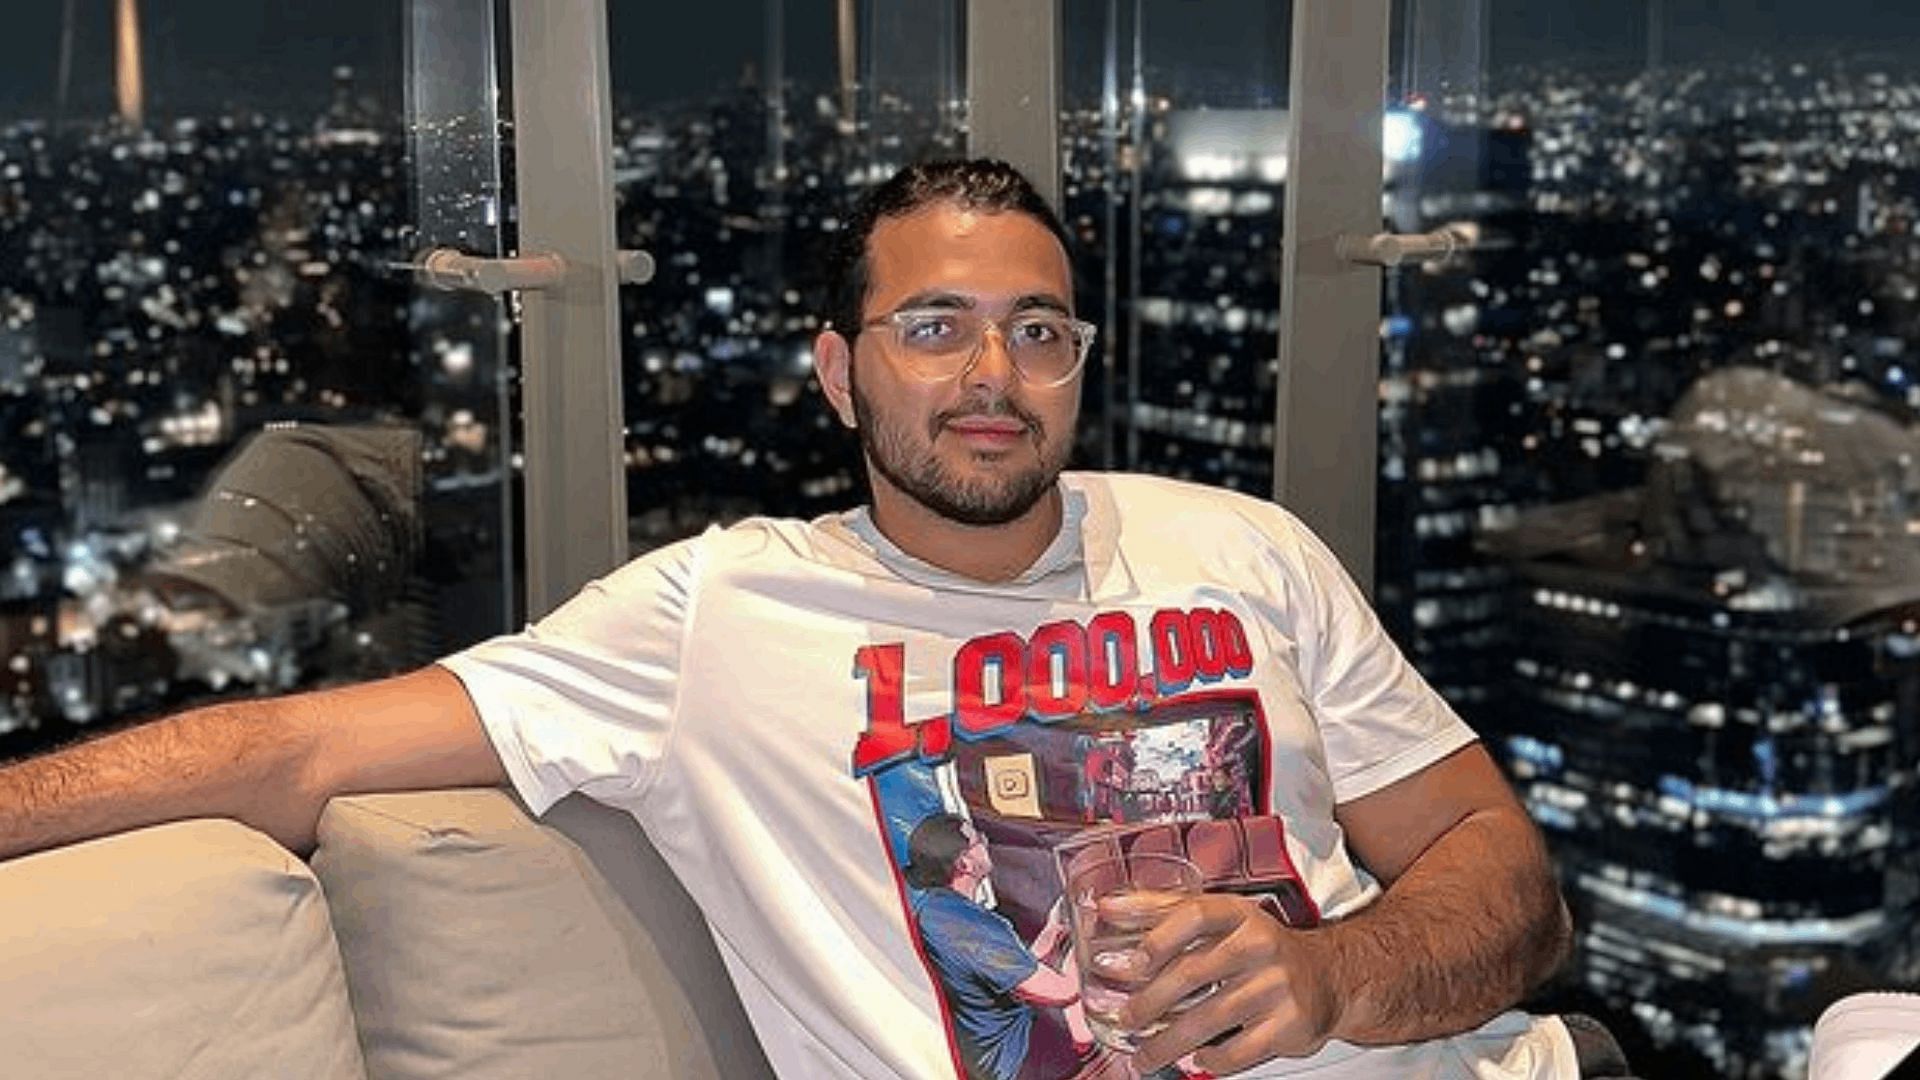 YourFellowArab expressed his gratitude to fans after his return (Image via arab/Instagram)